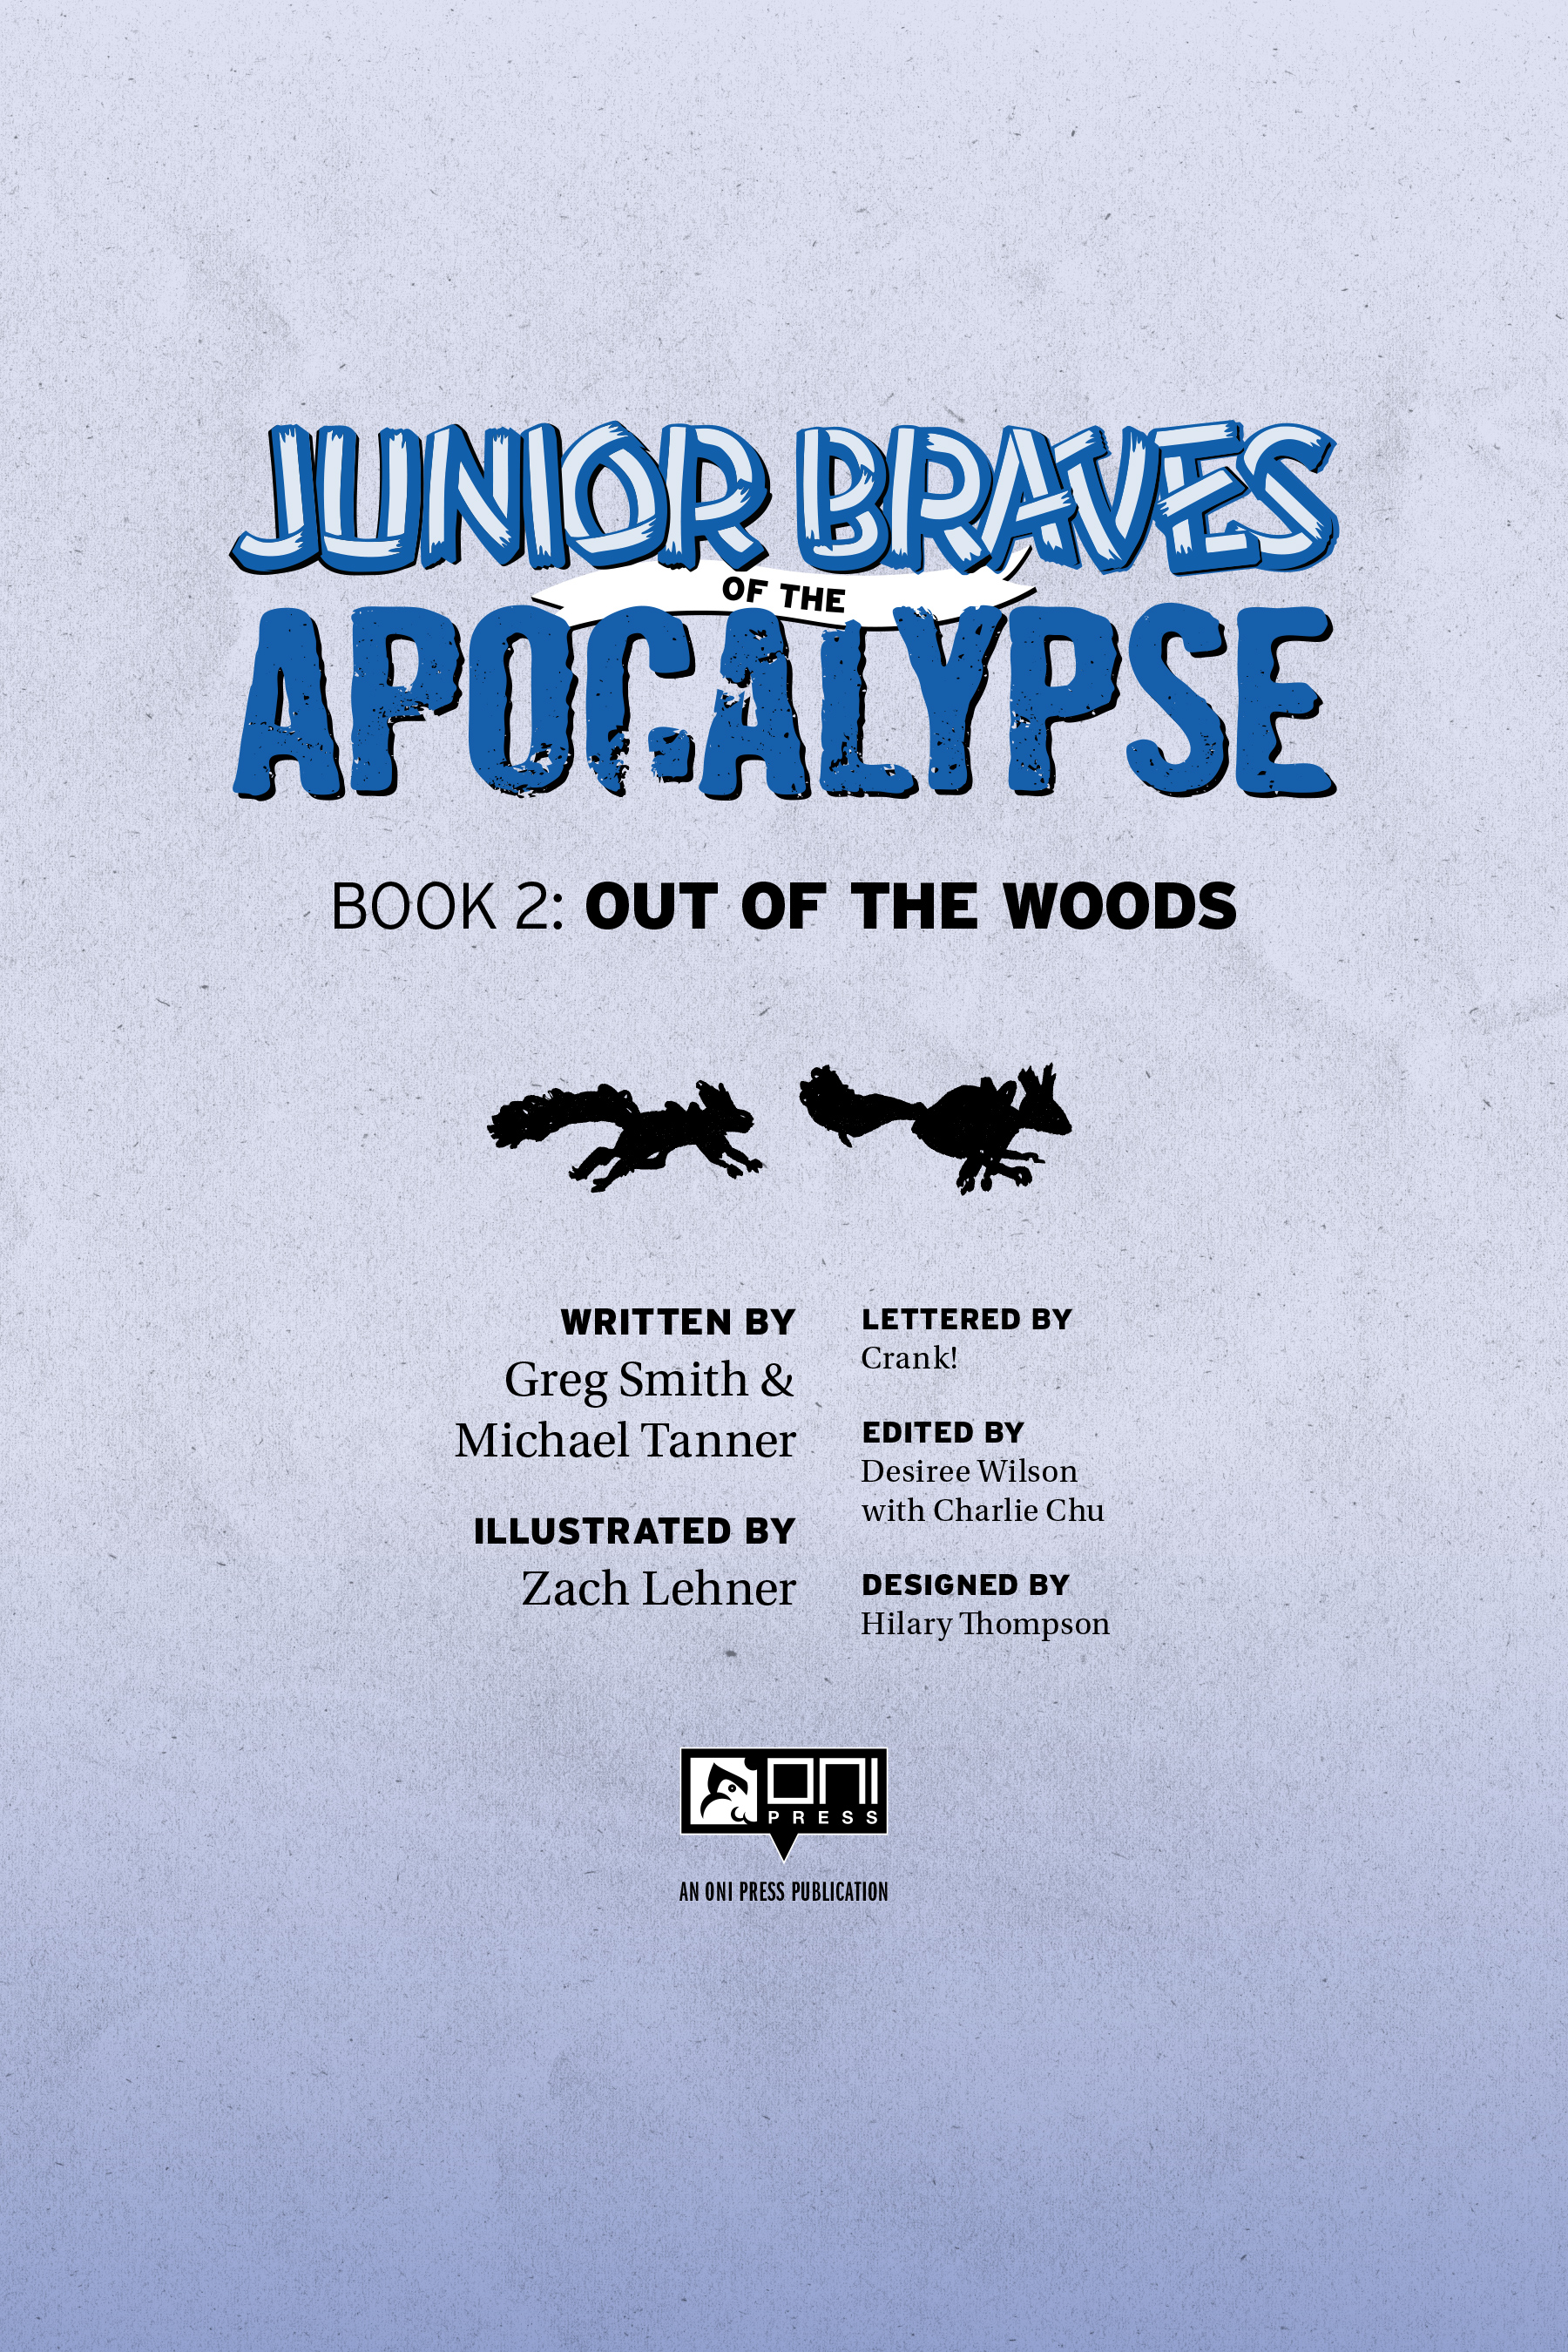 Read online Junior Braves of the Apocalypse: Out of the Woods comic -  Issue # TPB (Part 1) - 4